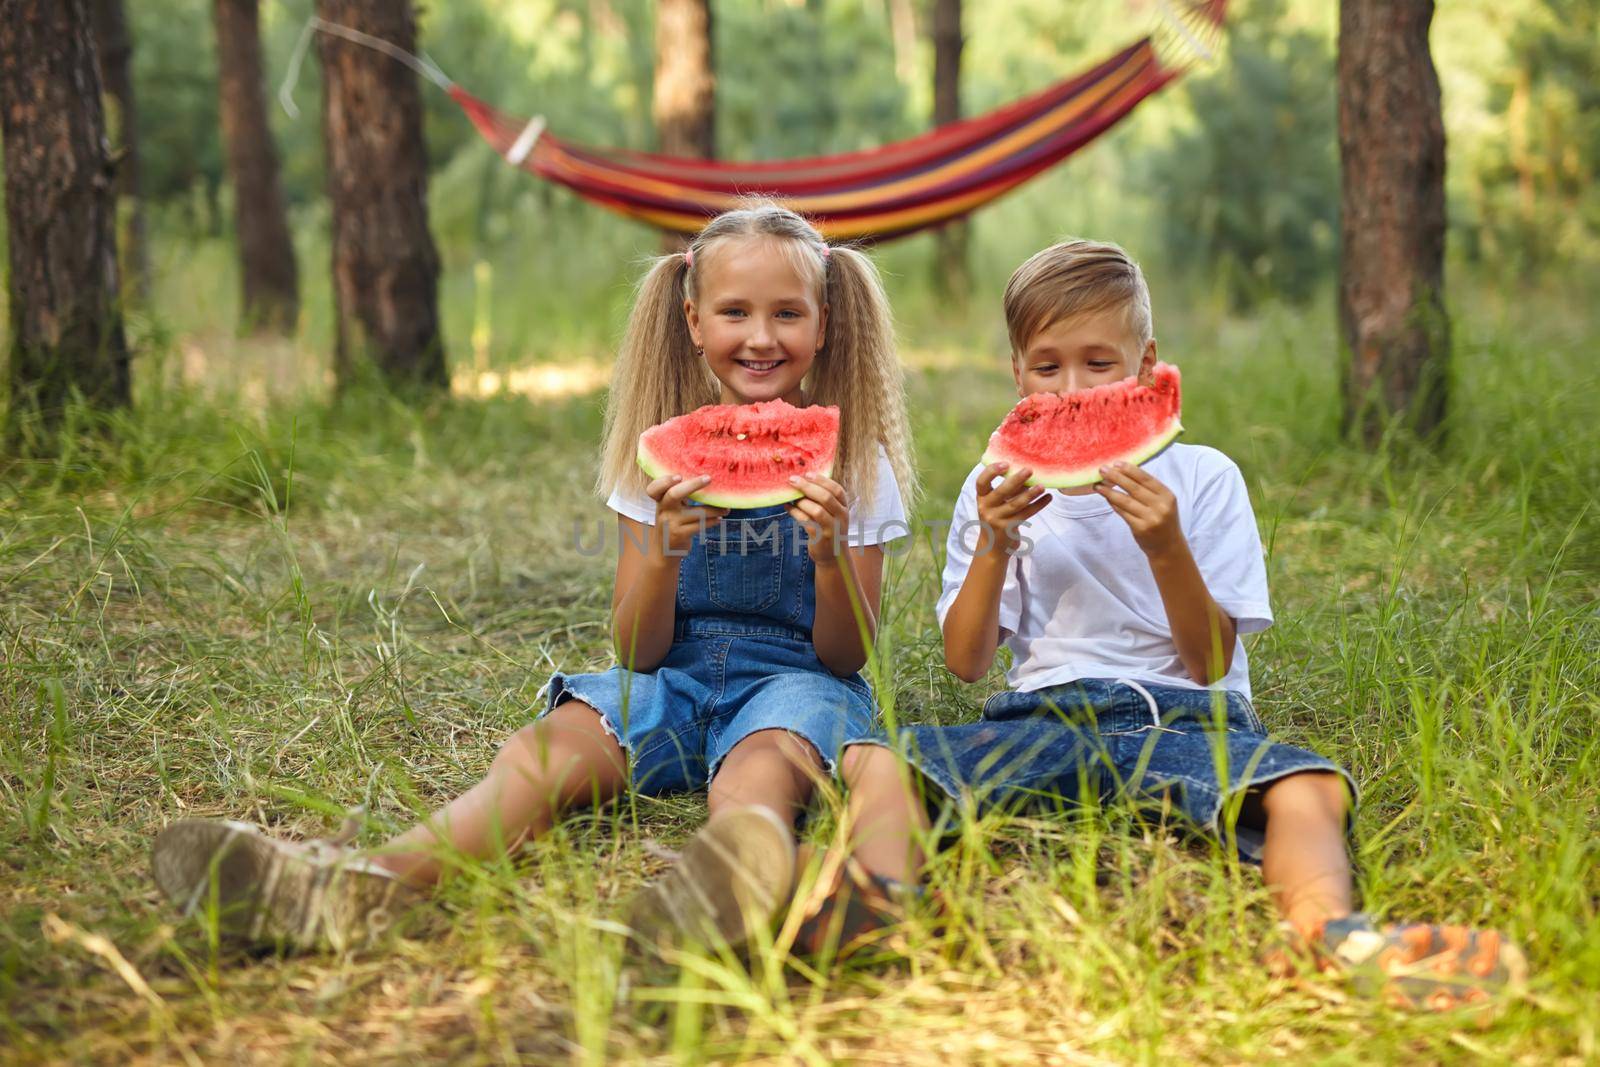 Kids eating watermelon in the park. Kids eat fruit outdoors. Healthy snack for children. Little girl and boy playing in the forest biting a slice of water melon